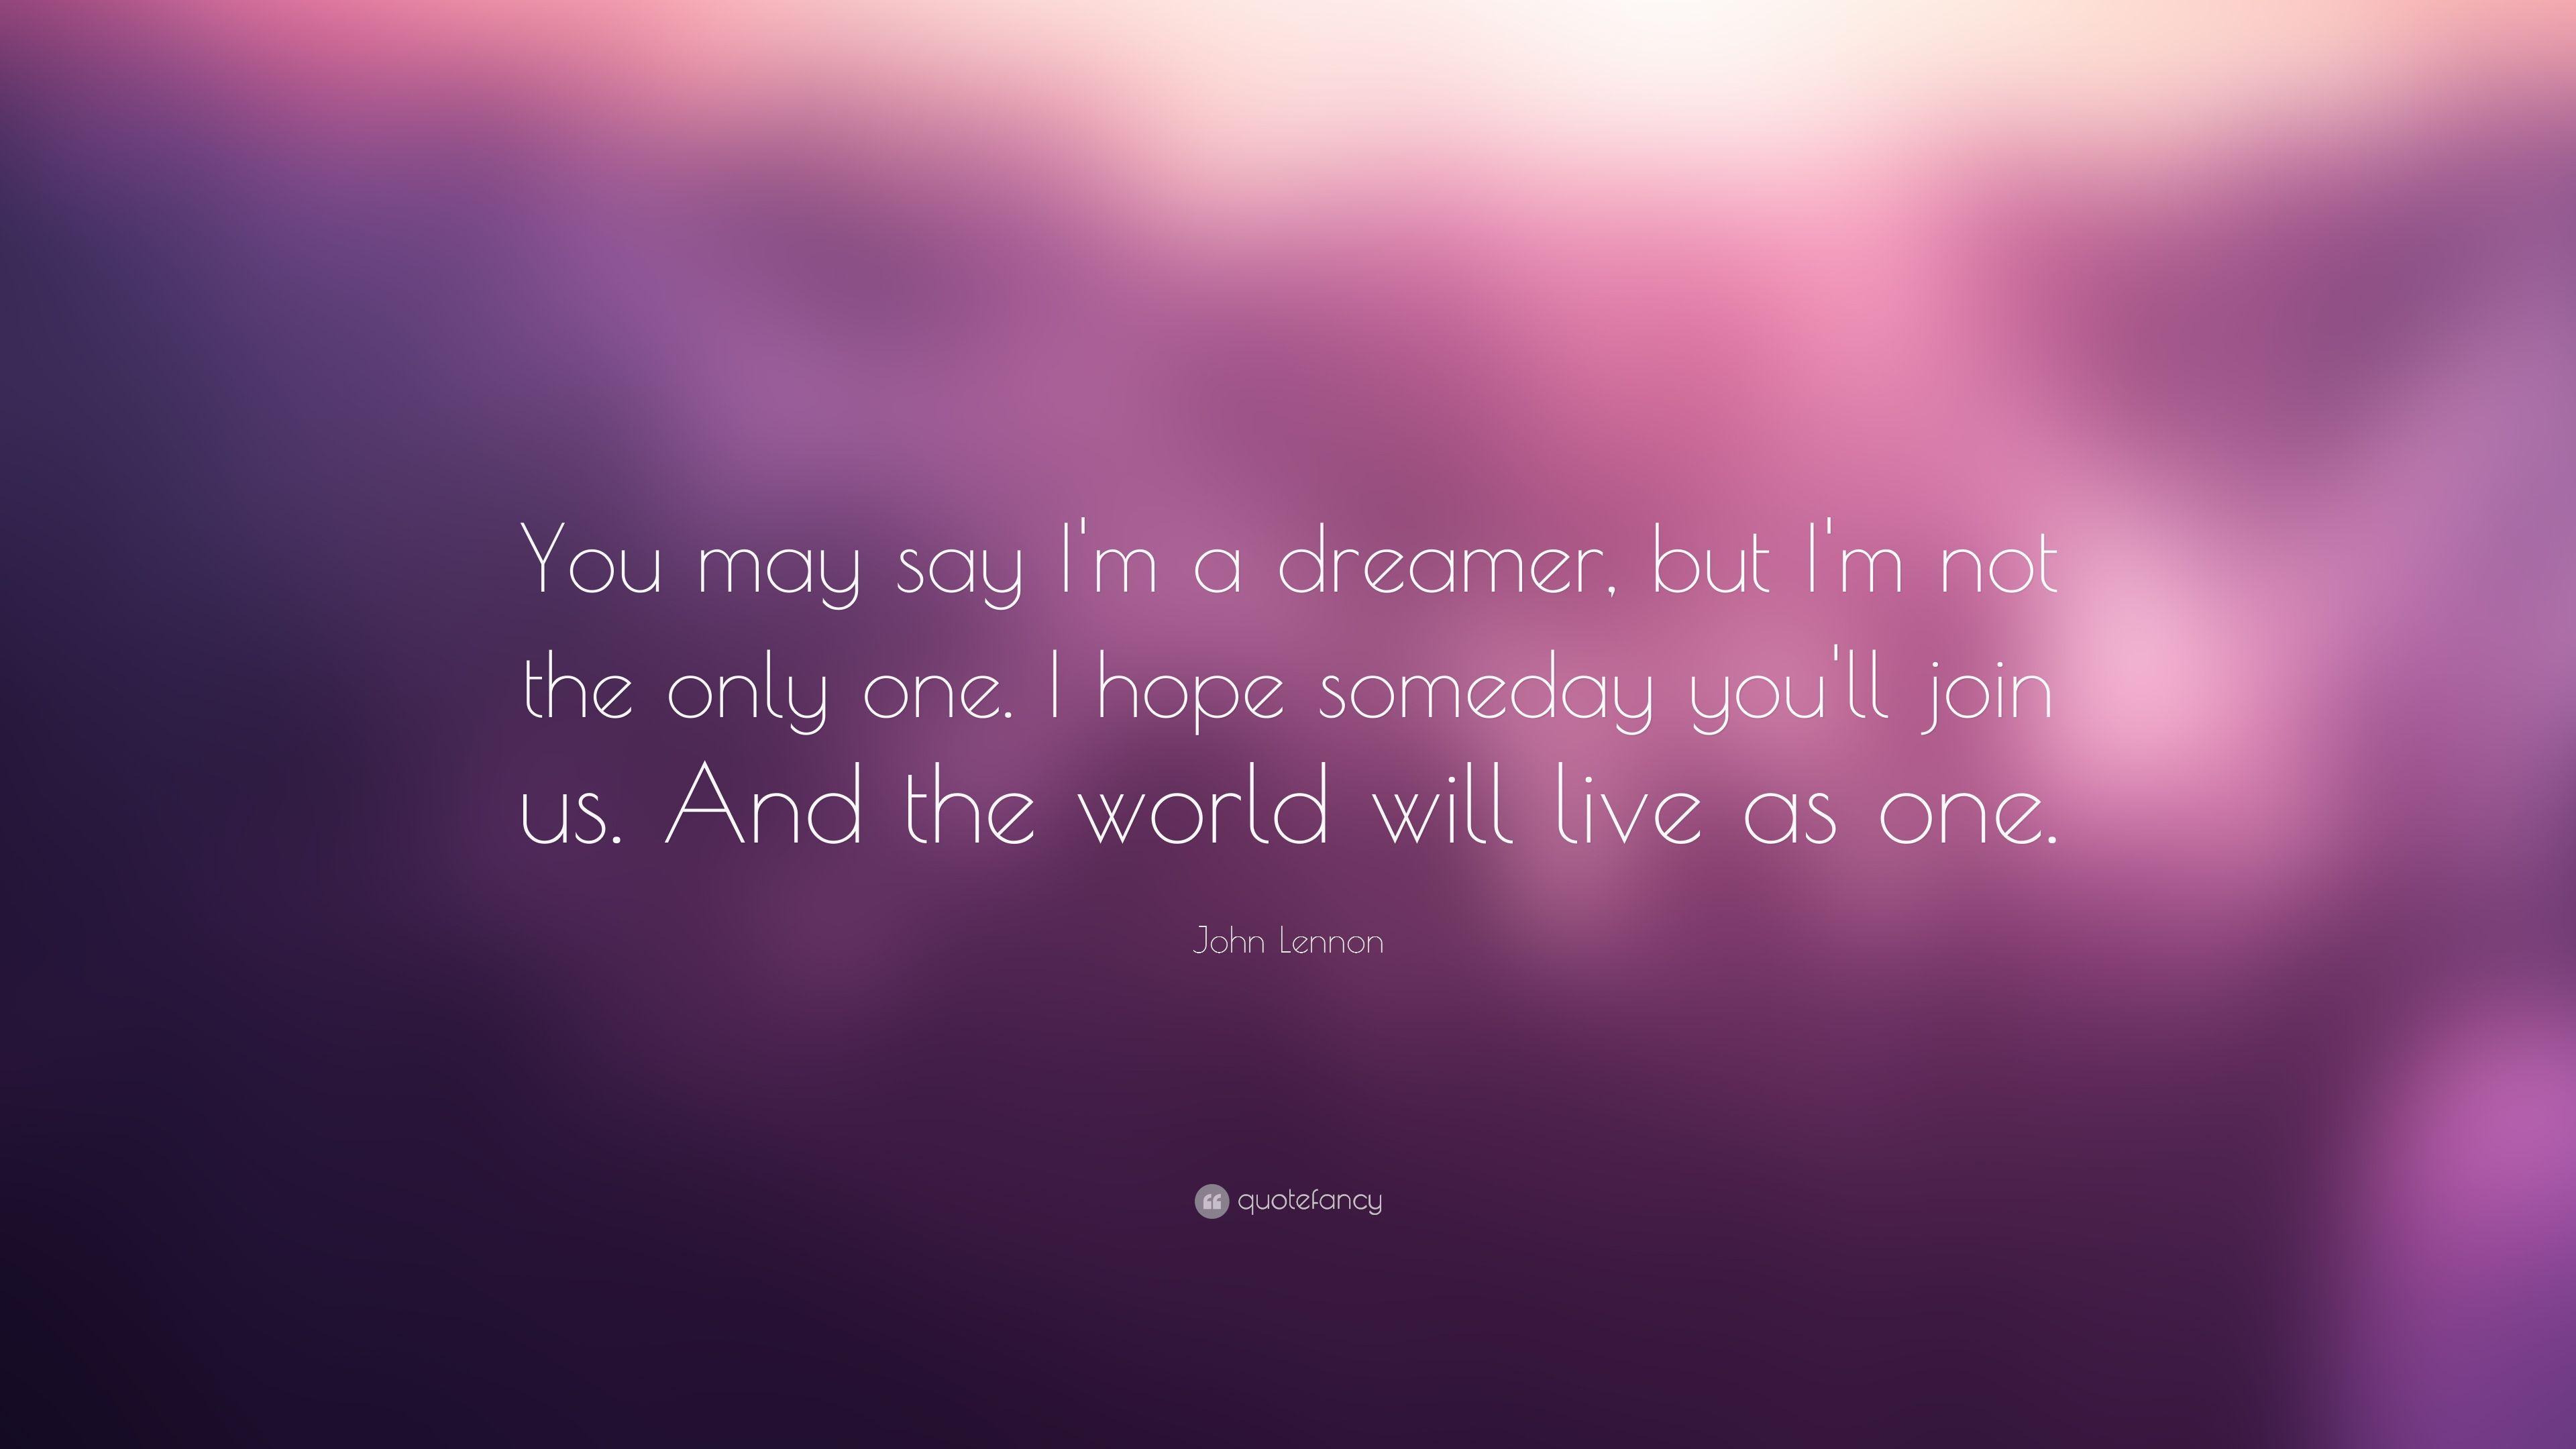 John Lennon Quote: “You may say I'm a dreamer, but I'm not